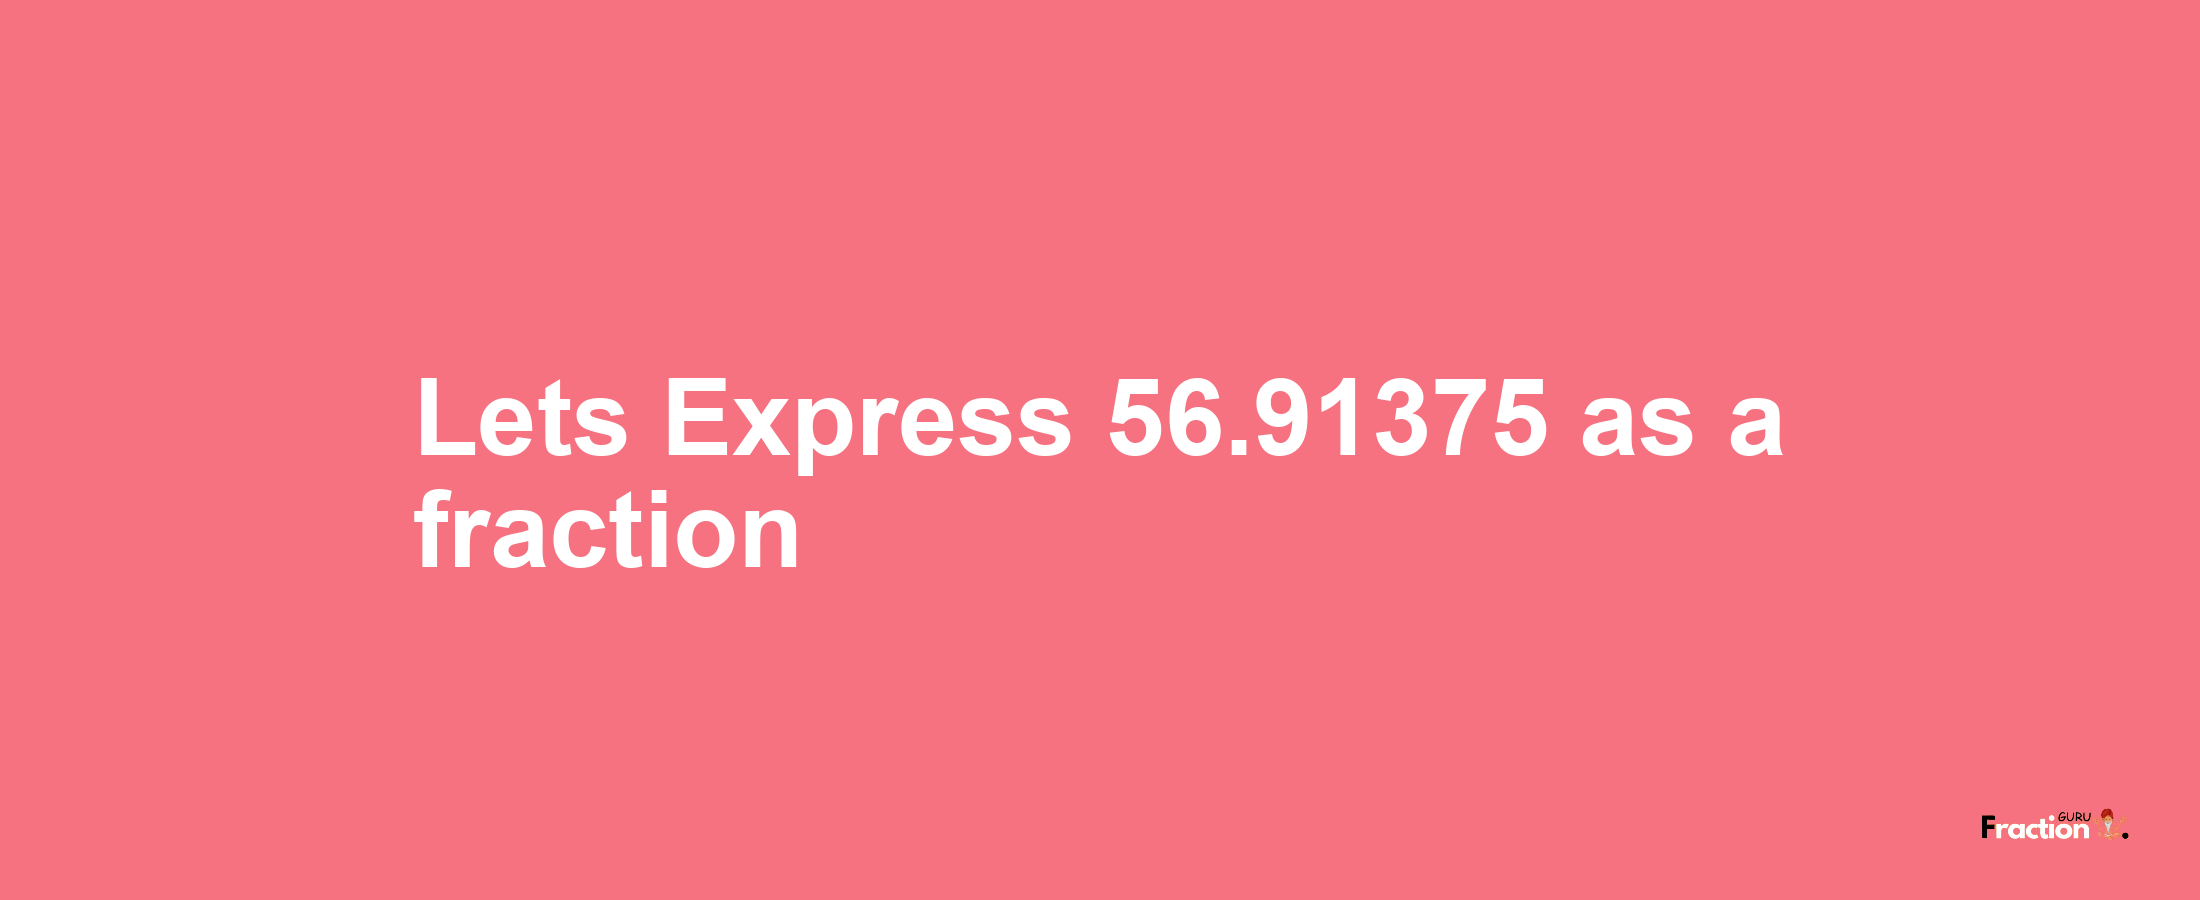 Lets Express 56.91375 as afraction